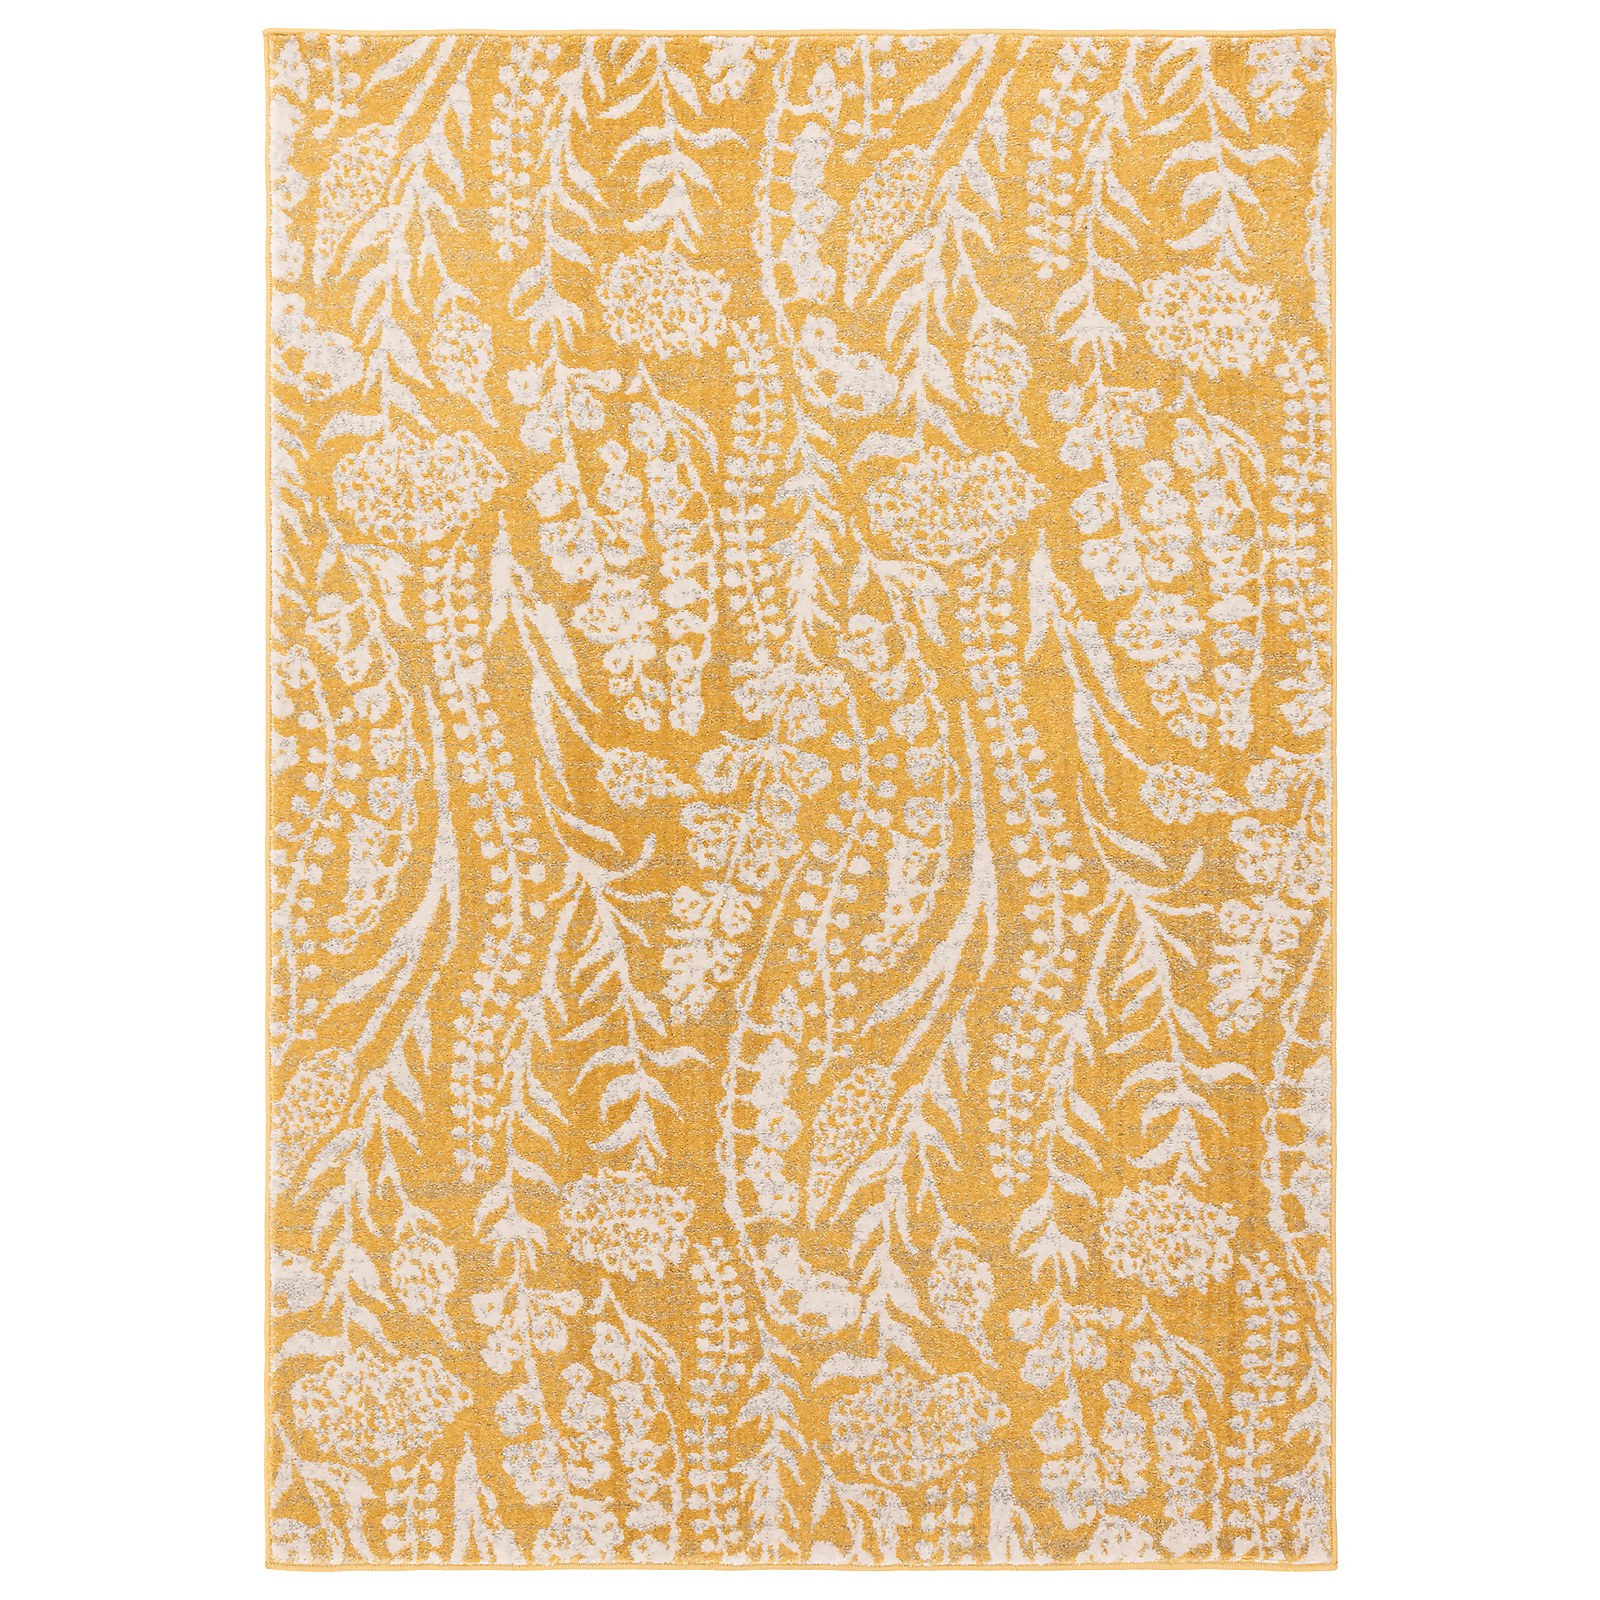 Photo of Country Floral Rug - Ochre - 120x170cm